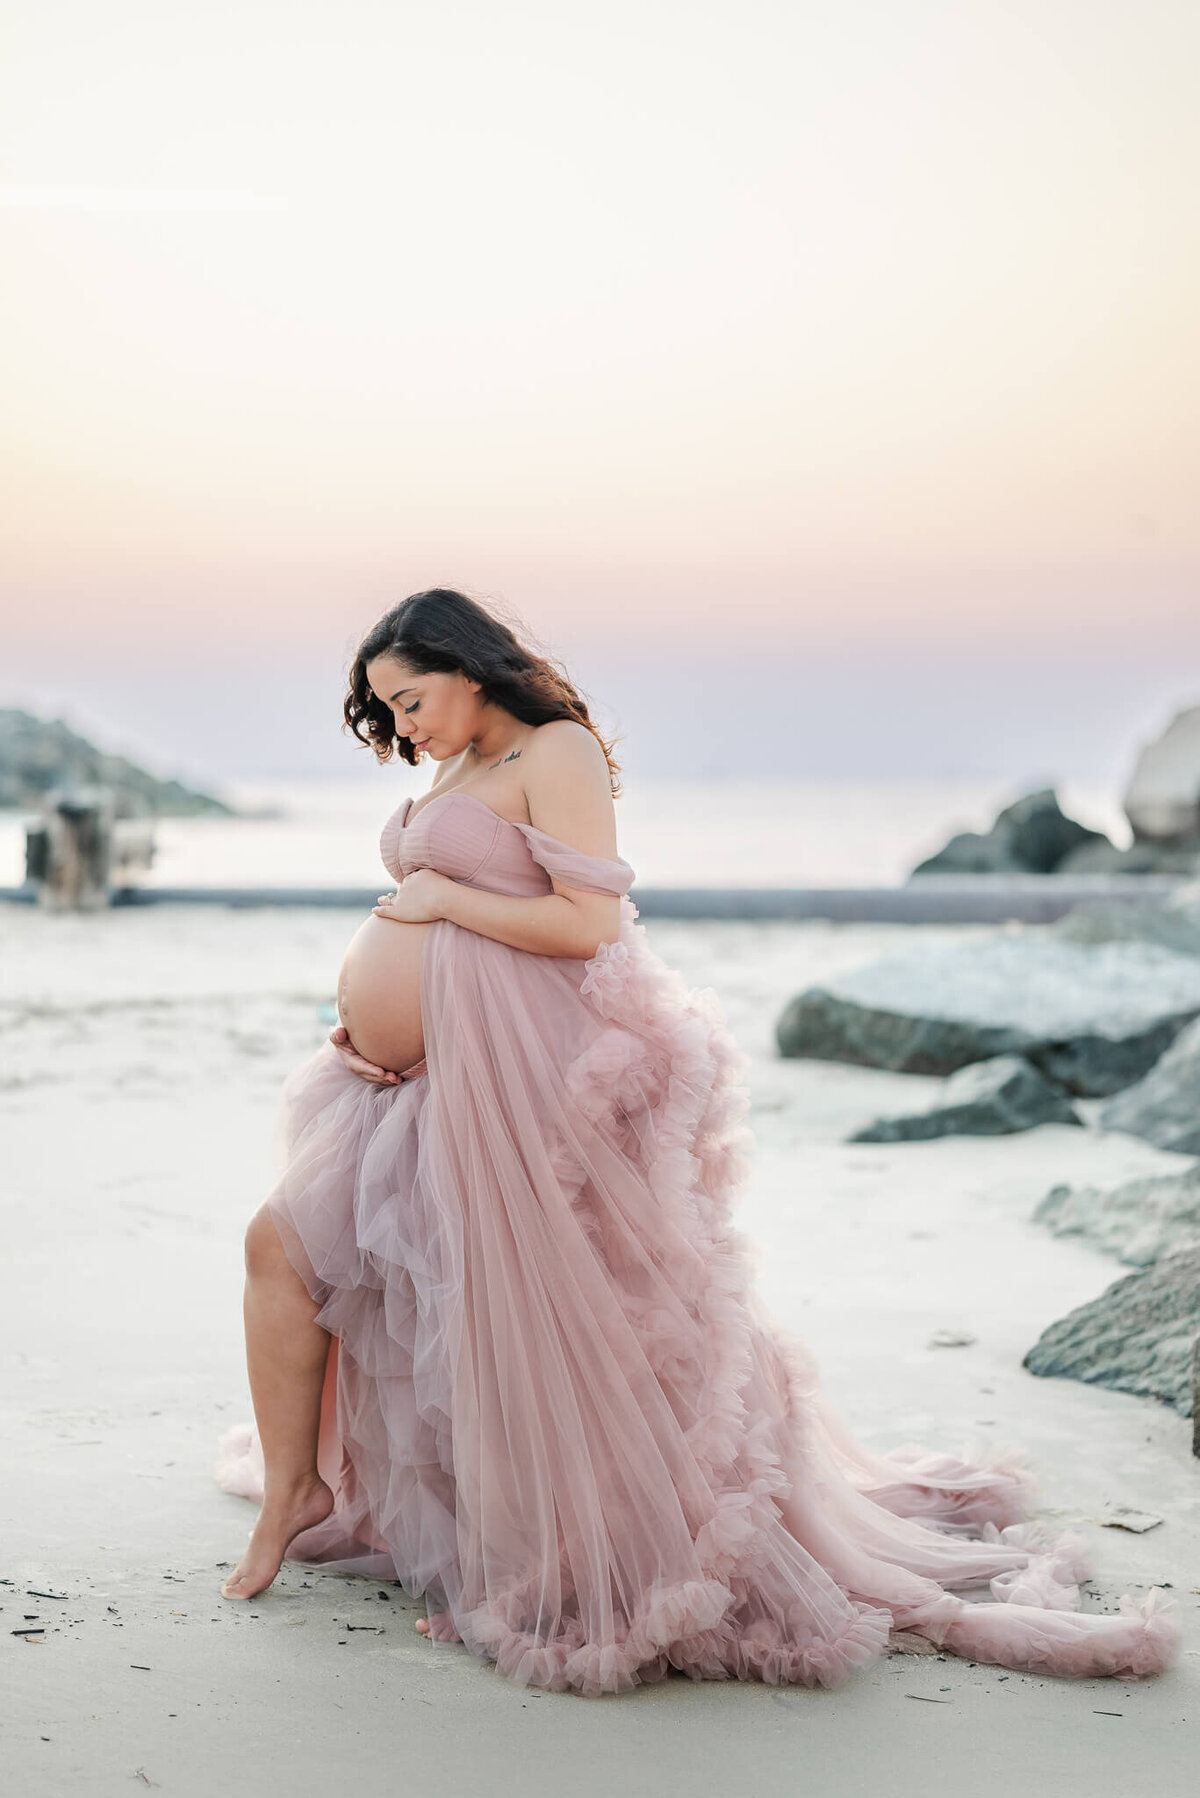 A mam to be is wearing a pink tulle gown during her maternity session. She stands on the beach and looks down at her growing belly.